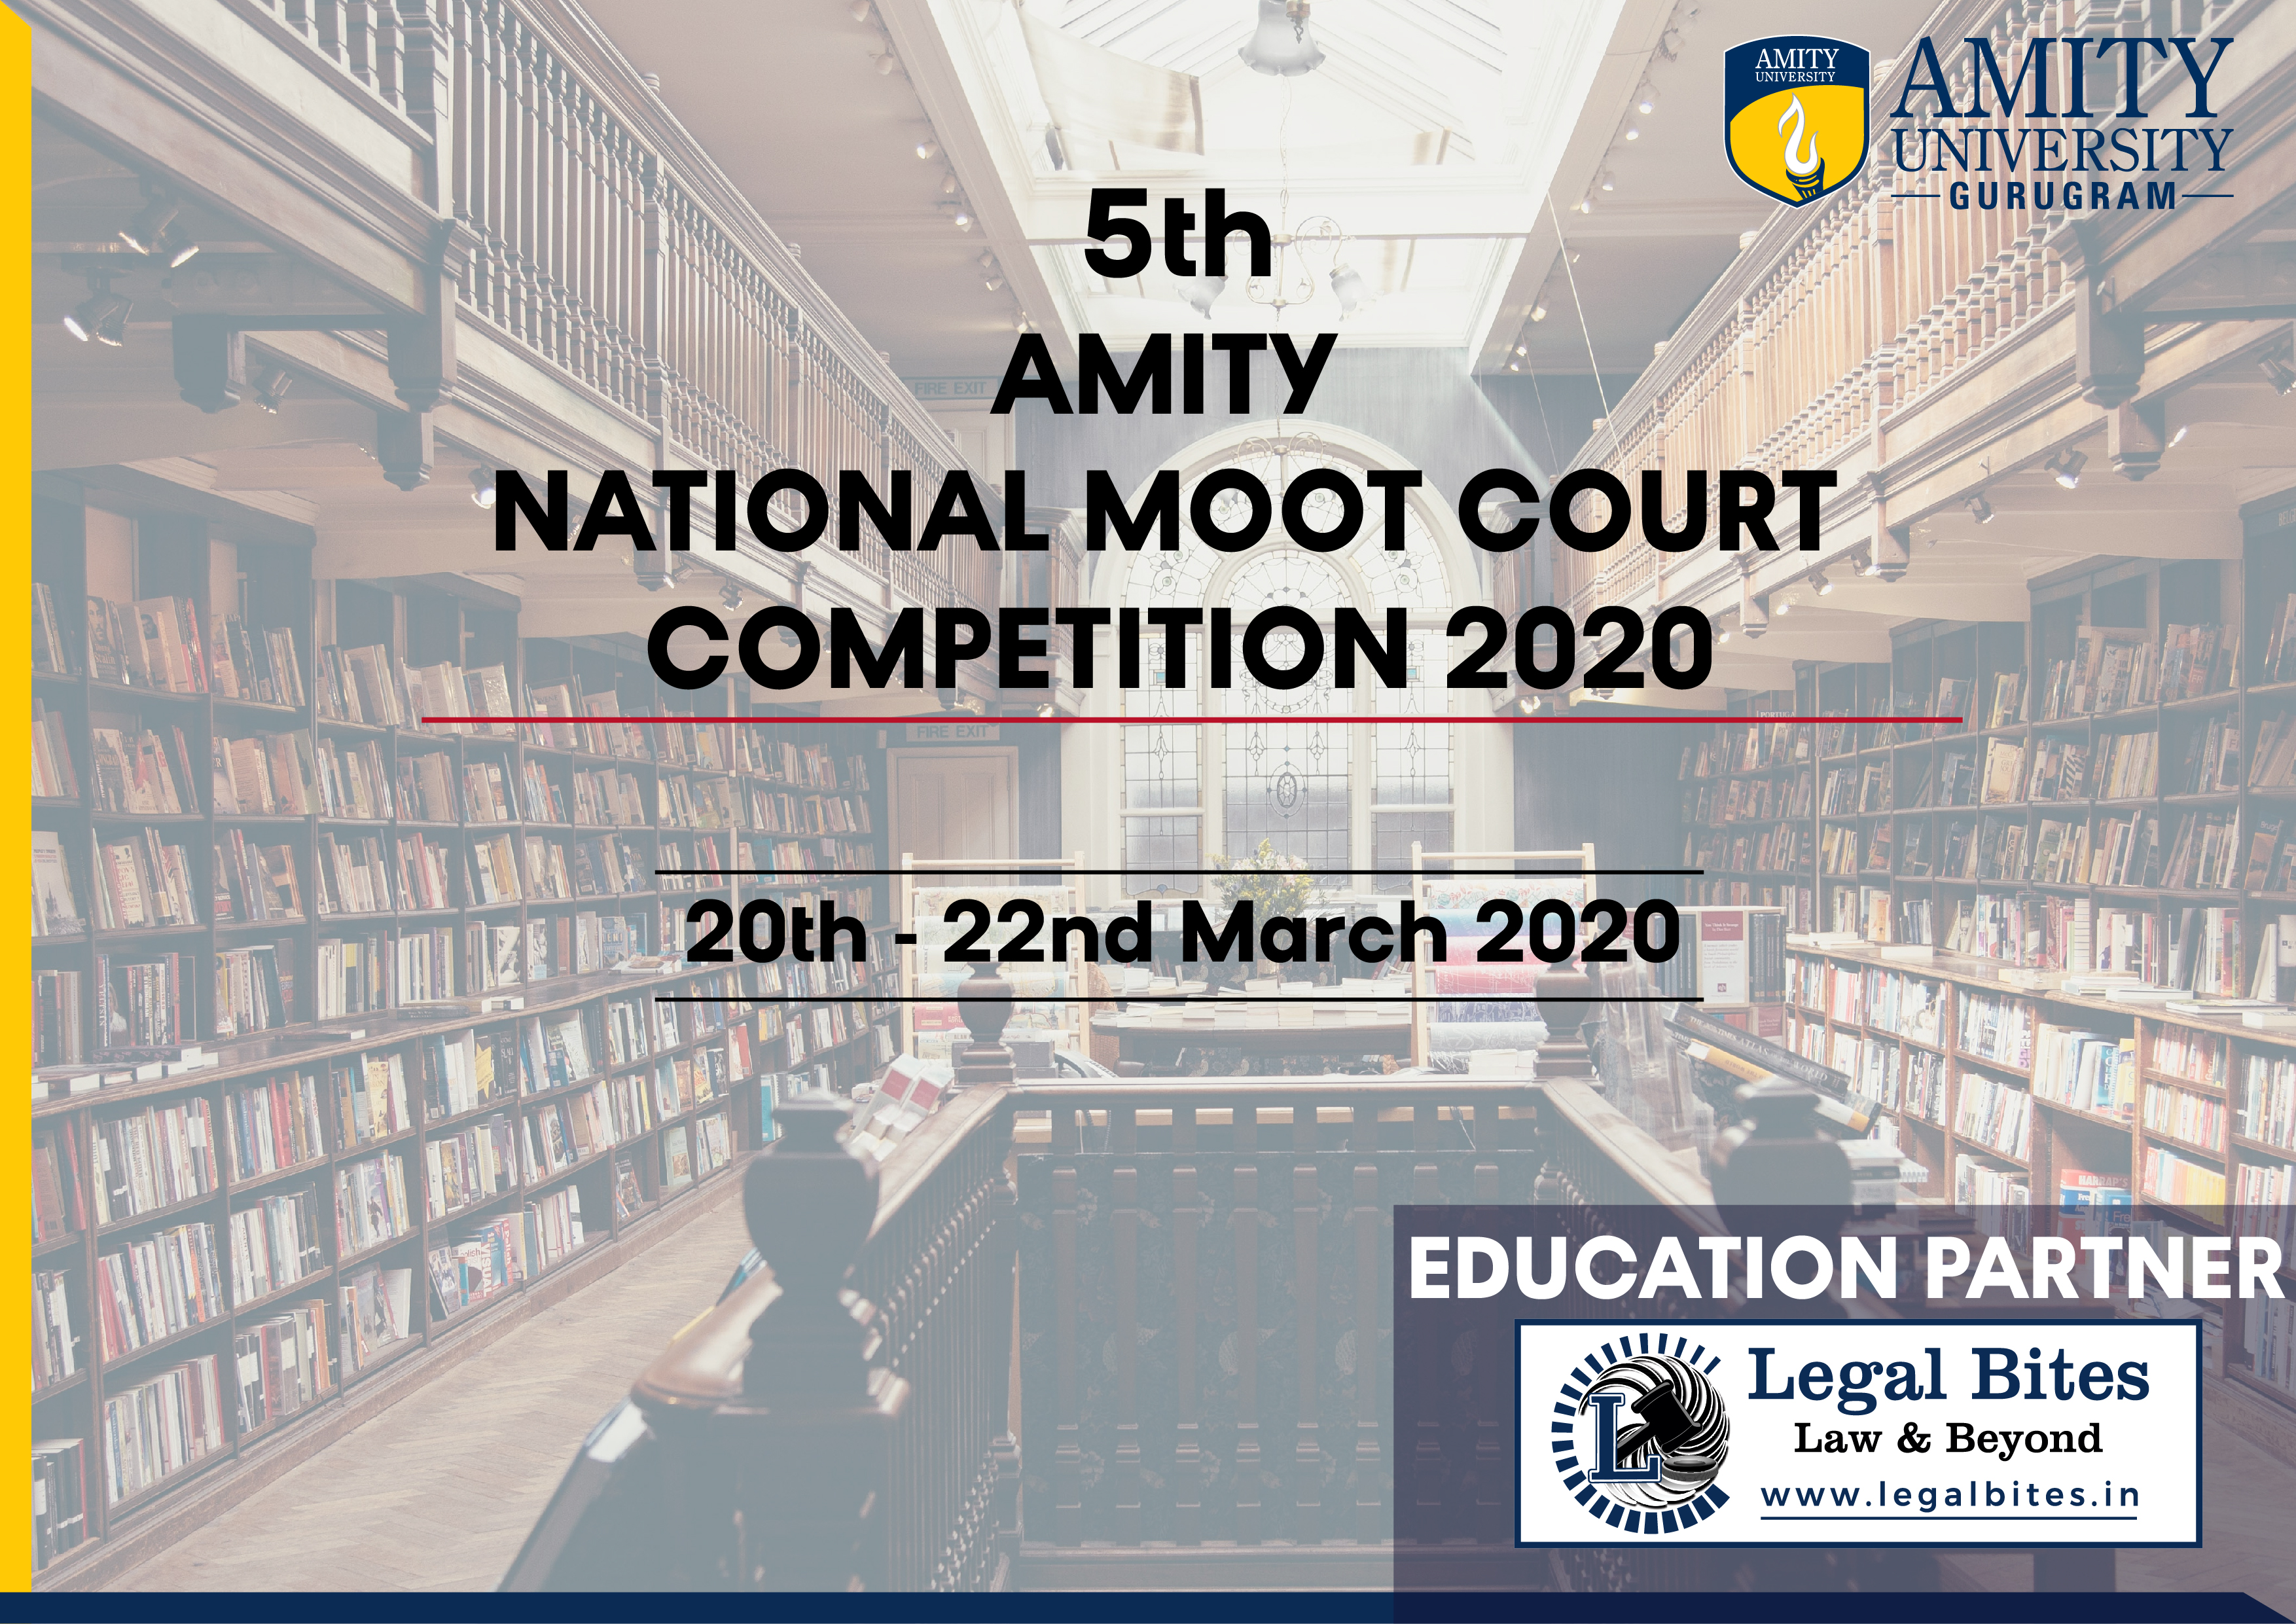 5th Amity National Moot Court Competition, 2020